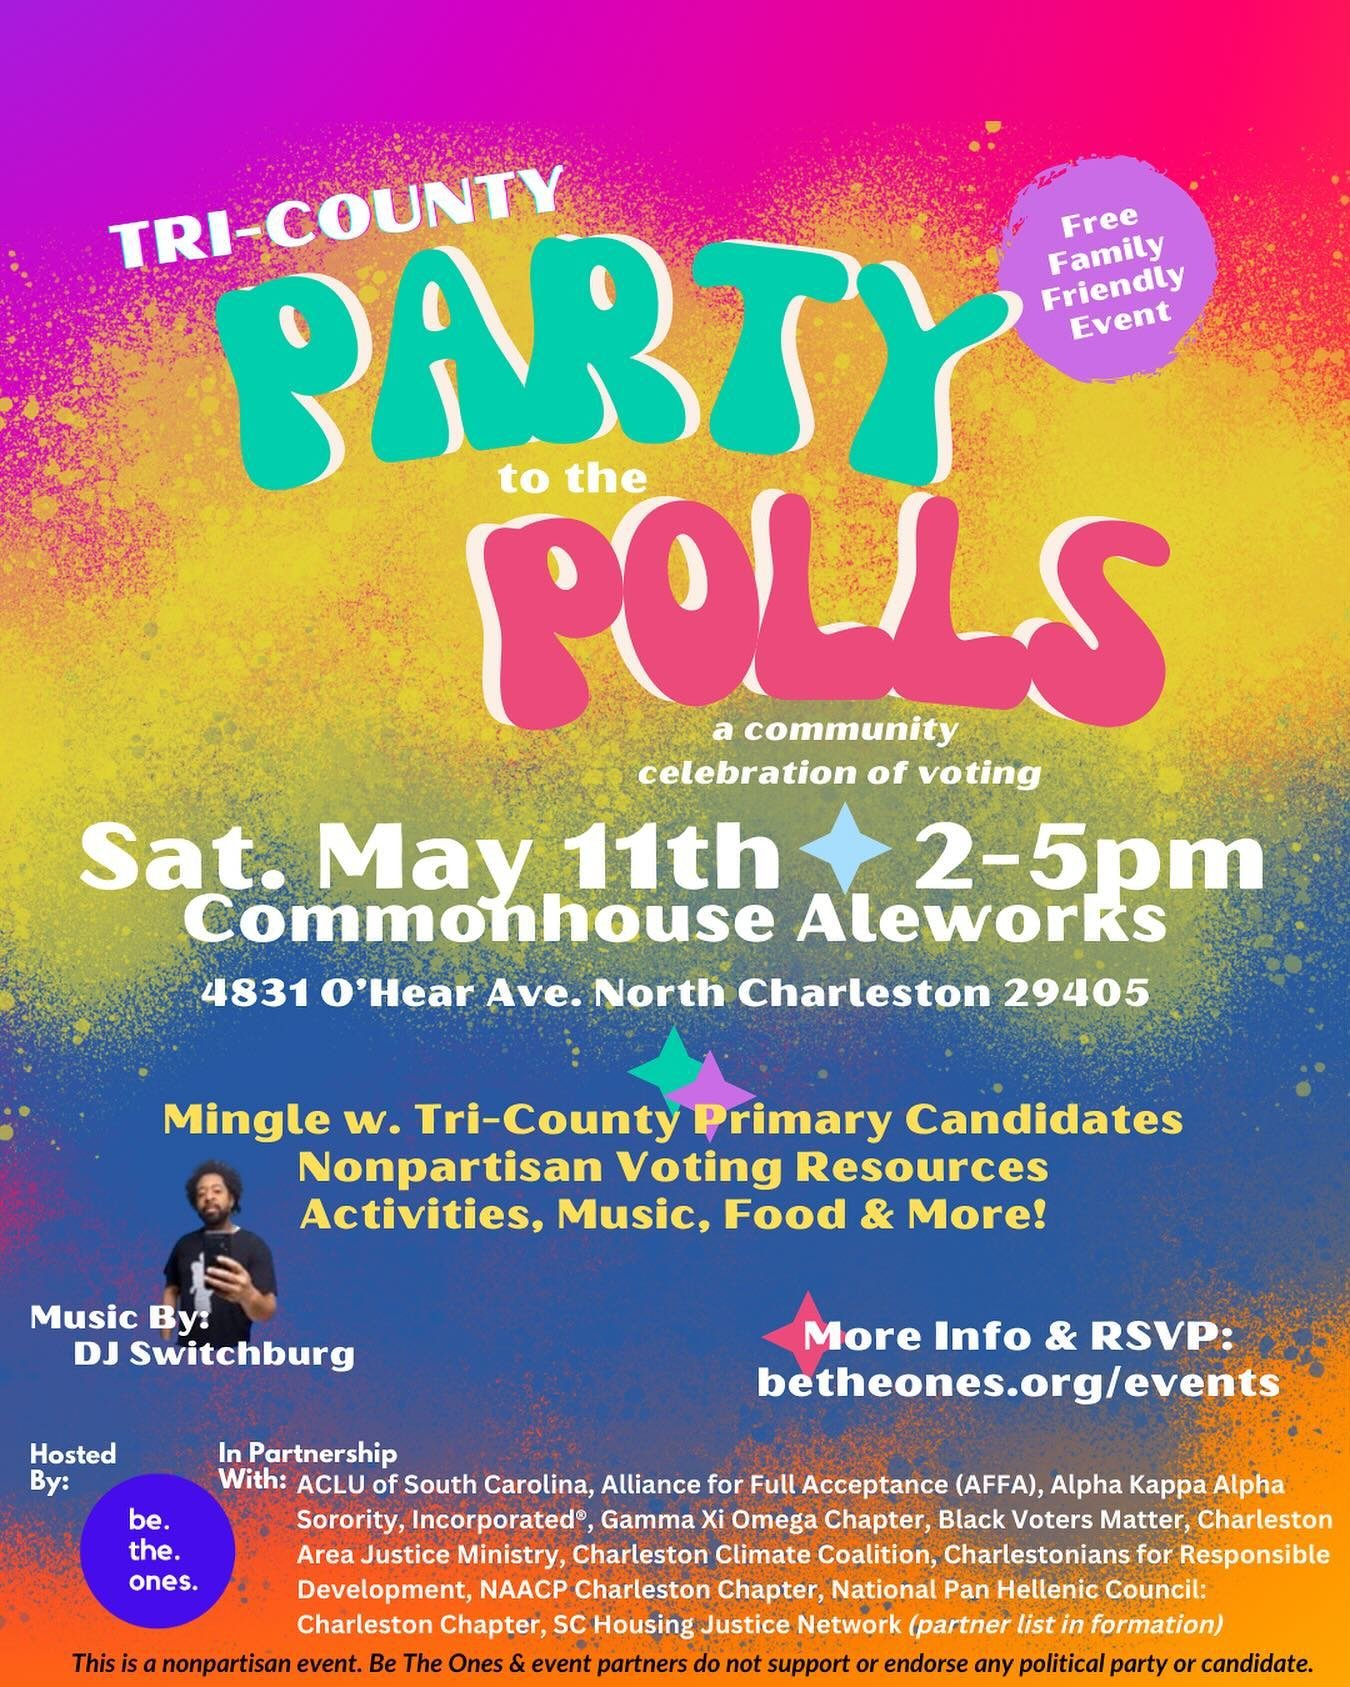 Join us, and our partners, on Sat. May 11th for a community celebration as we prepare for the South Carolina statewide primaries in June. 

This free, family friendly nonpartisan event gives Berkeley, Charleston, &amp; Dorchester County constituents 